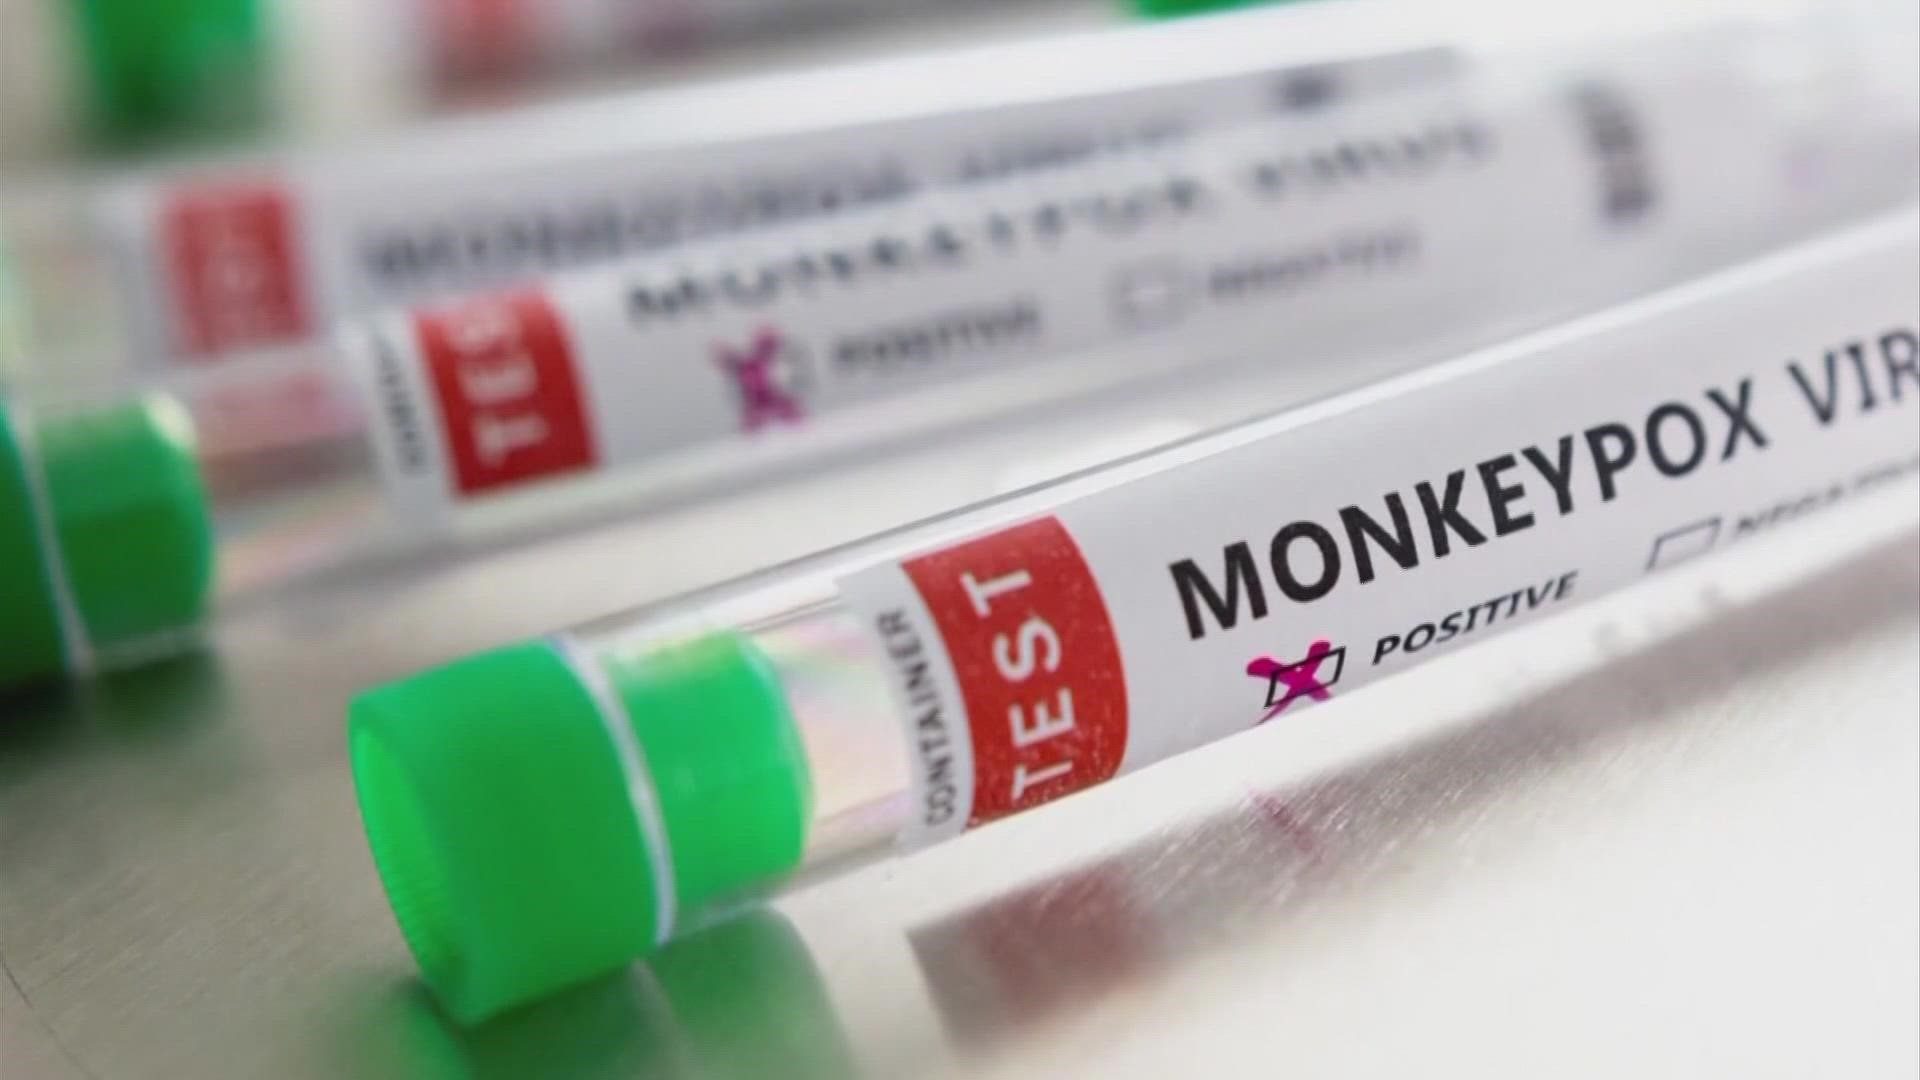 This is the second reported case of monkeypox in the state.